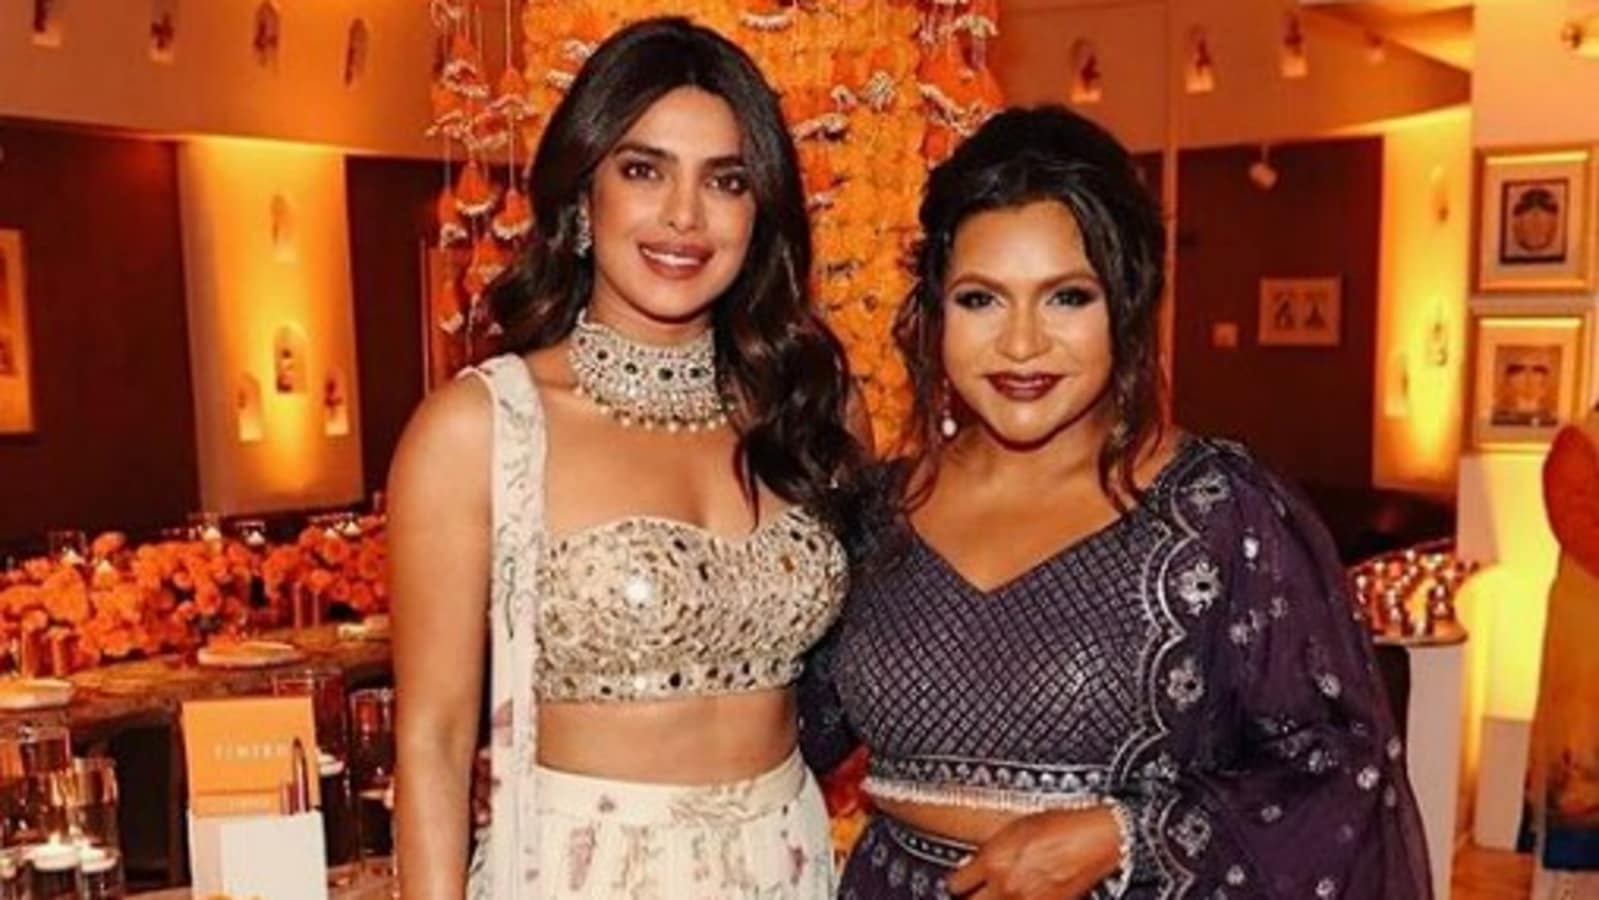 You are currently viewing Priyanka Chopra’s new venture gets shoutout from Mindy Kaling: ‘Gorgeous’